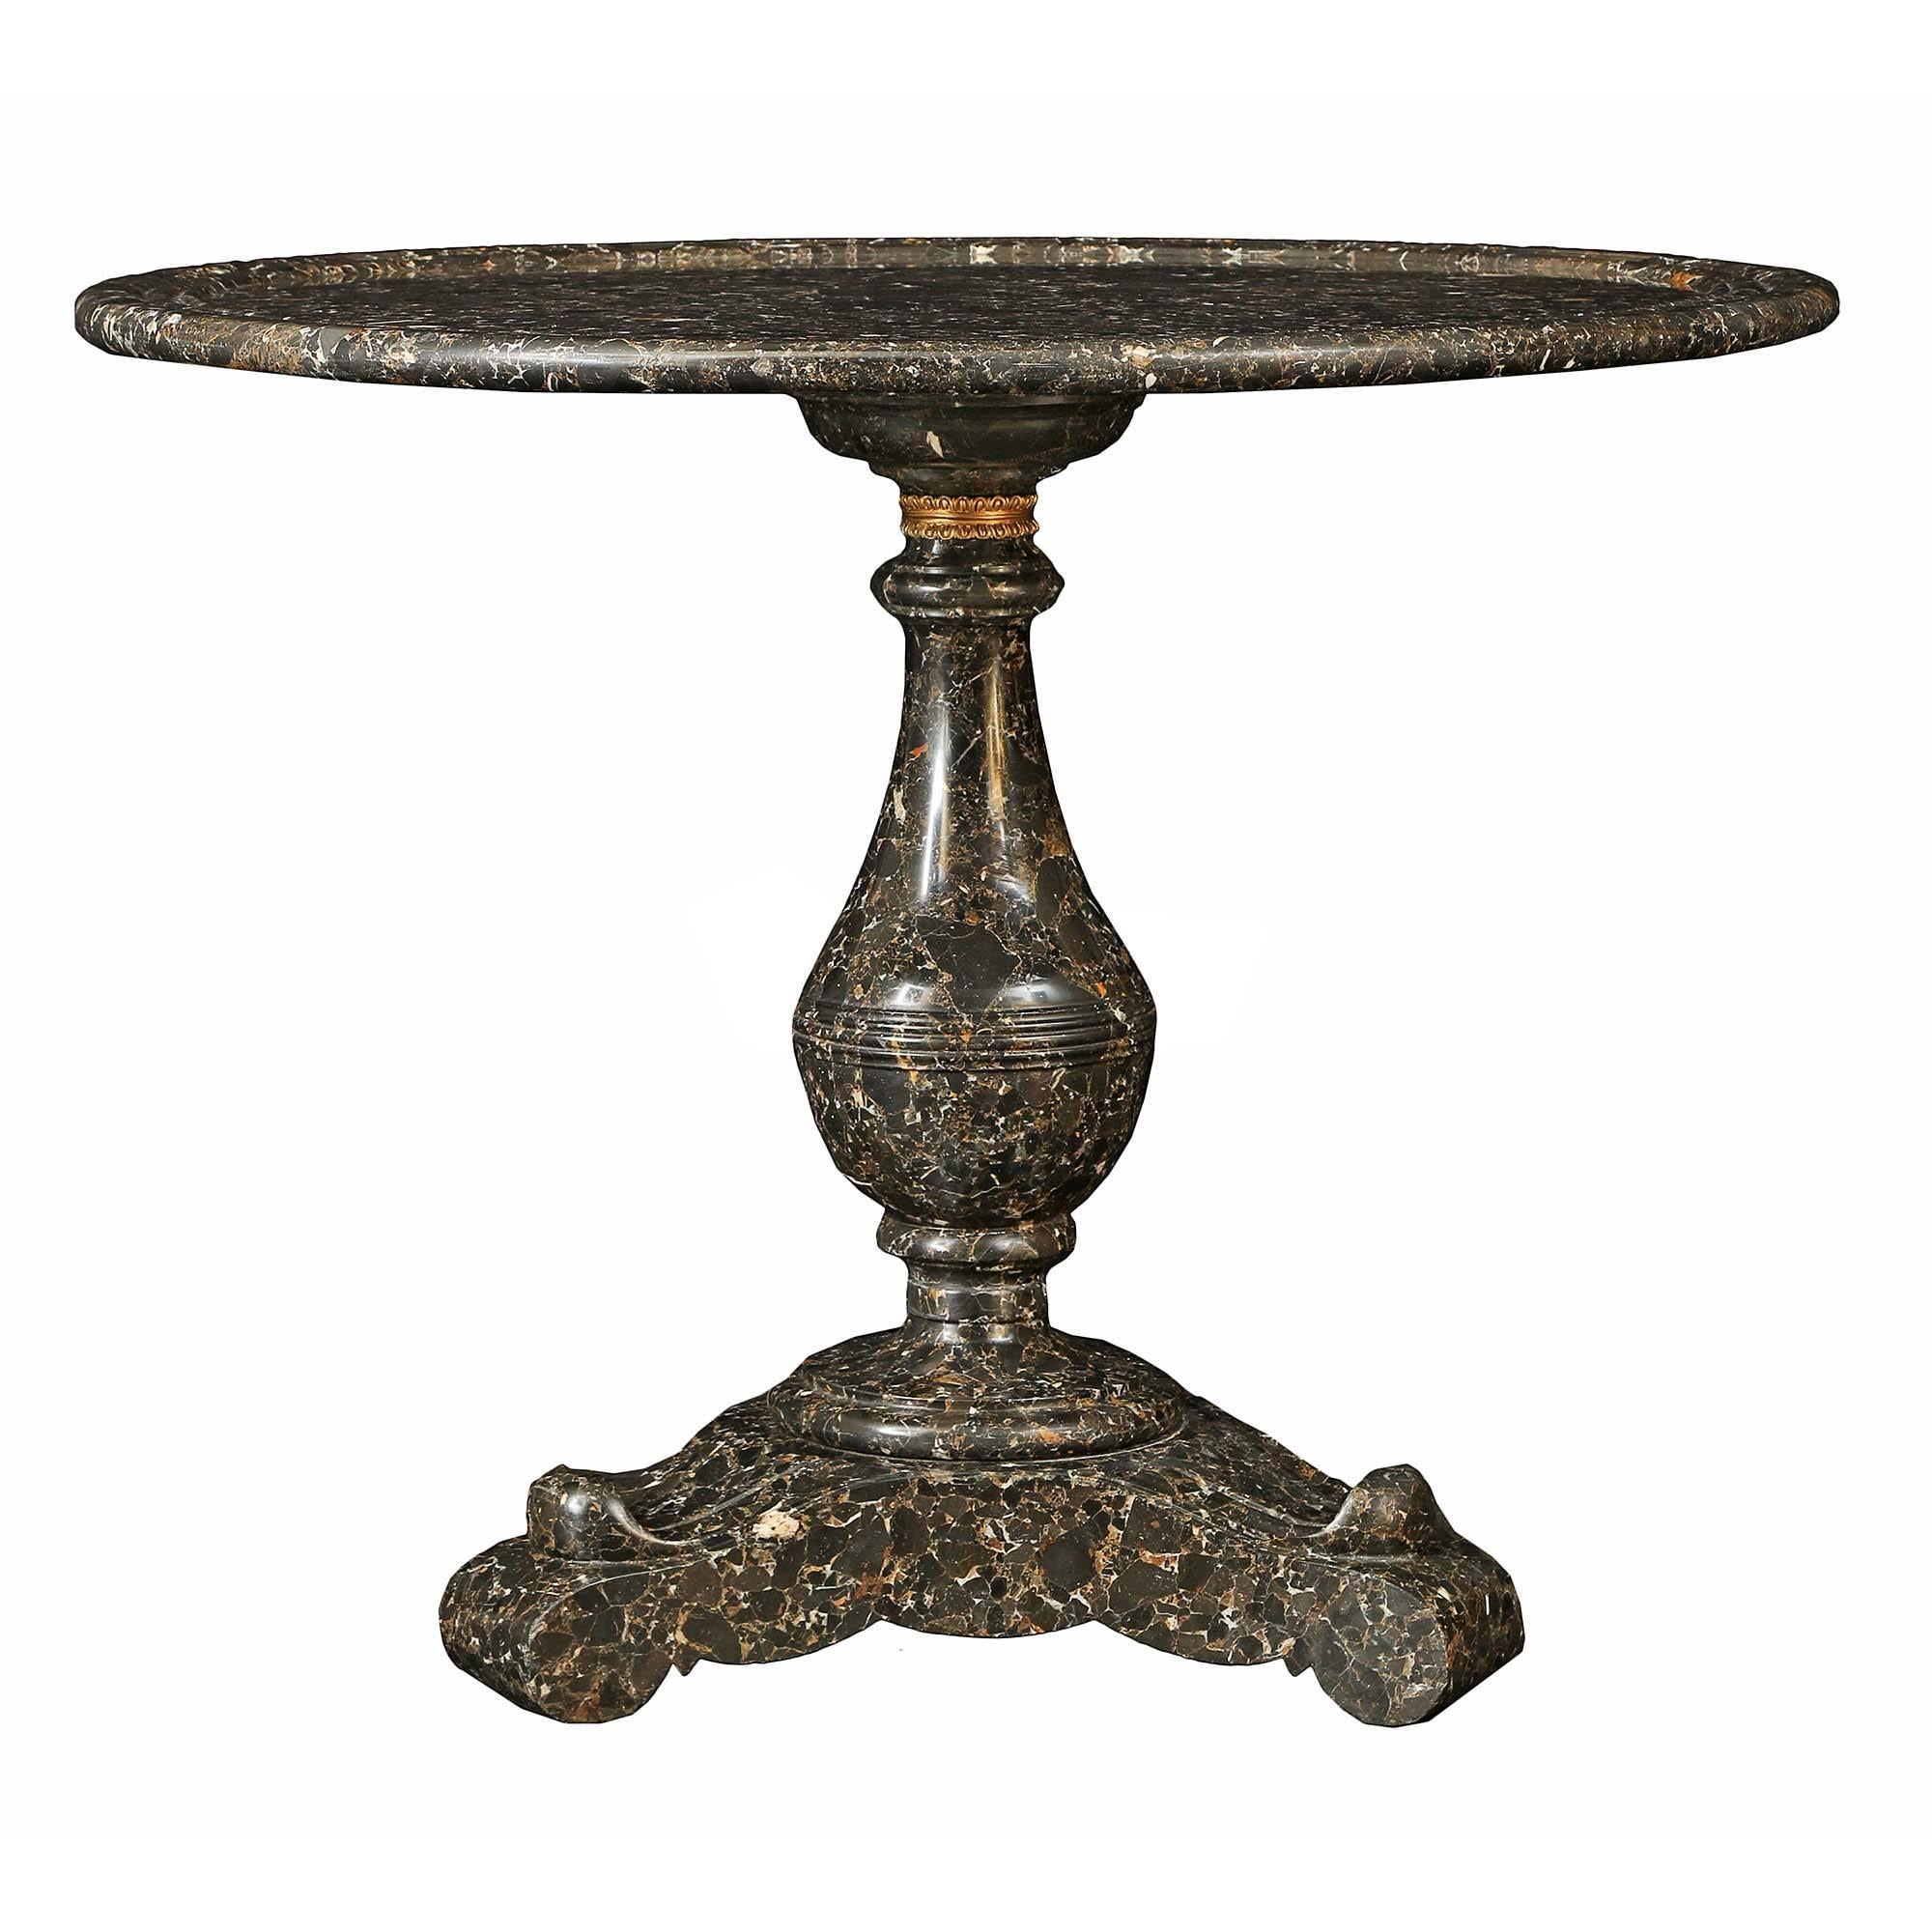 A stunning French 19th century Charles X Period solid Pyrénéese Portor marble center table. Raised by a triangular base with rounded corners and concave sides. Above is the baluster shaped central support with fluted design and finely chased